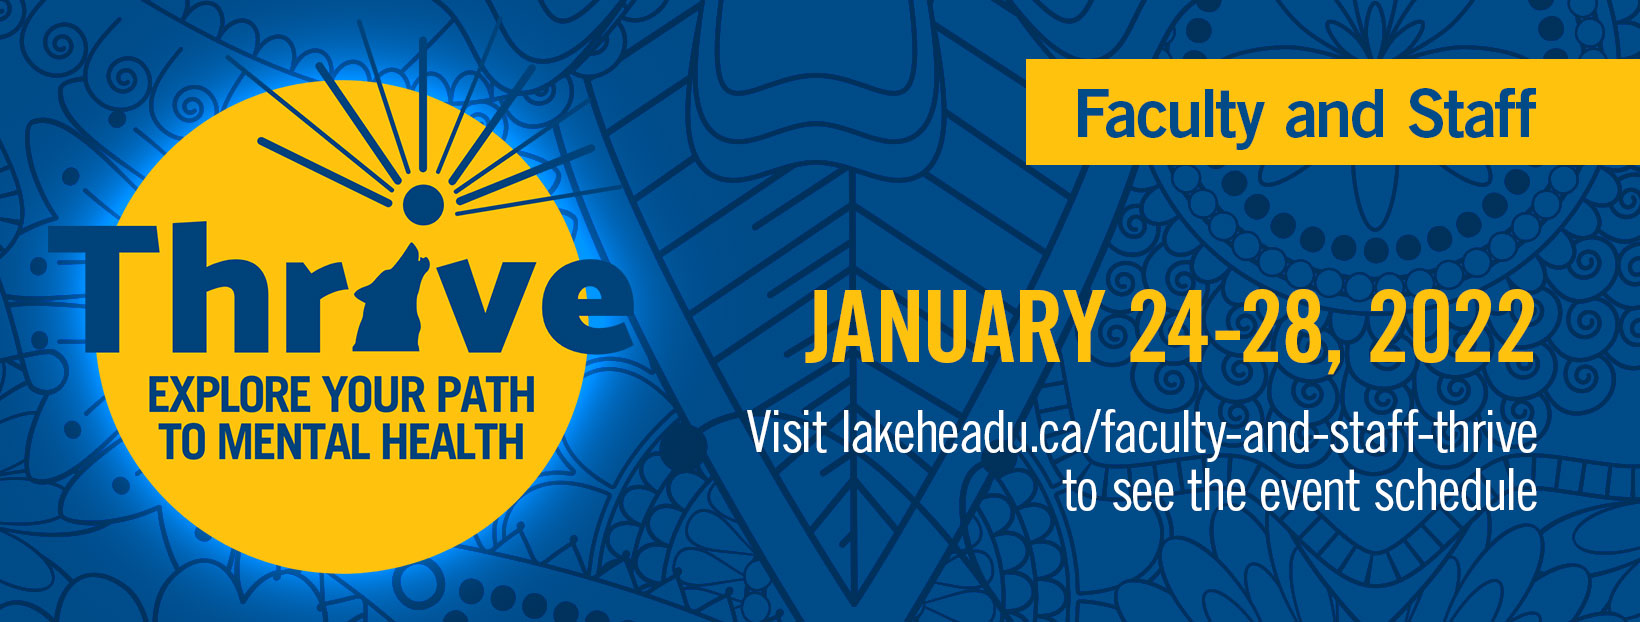 Thrive: Explore your path to mental health. Visit lakeheadu.ca/faculty-staff-thrive for a list of events